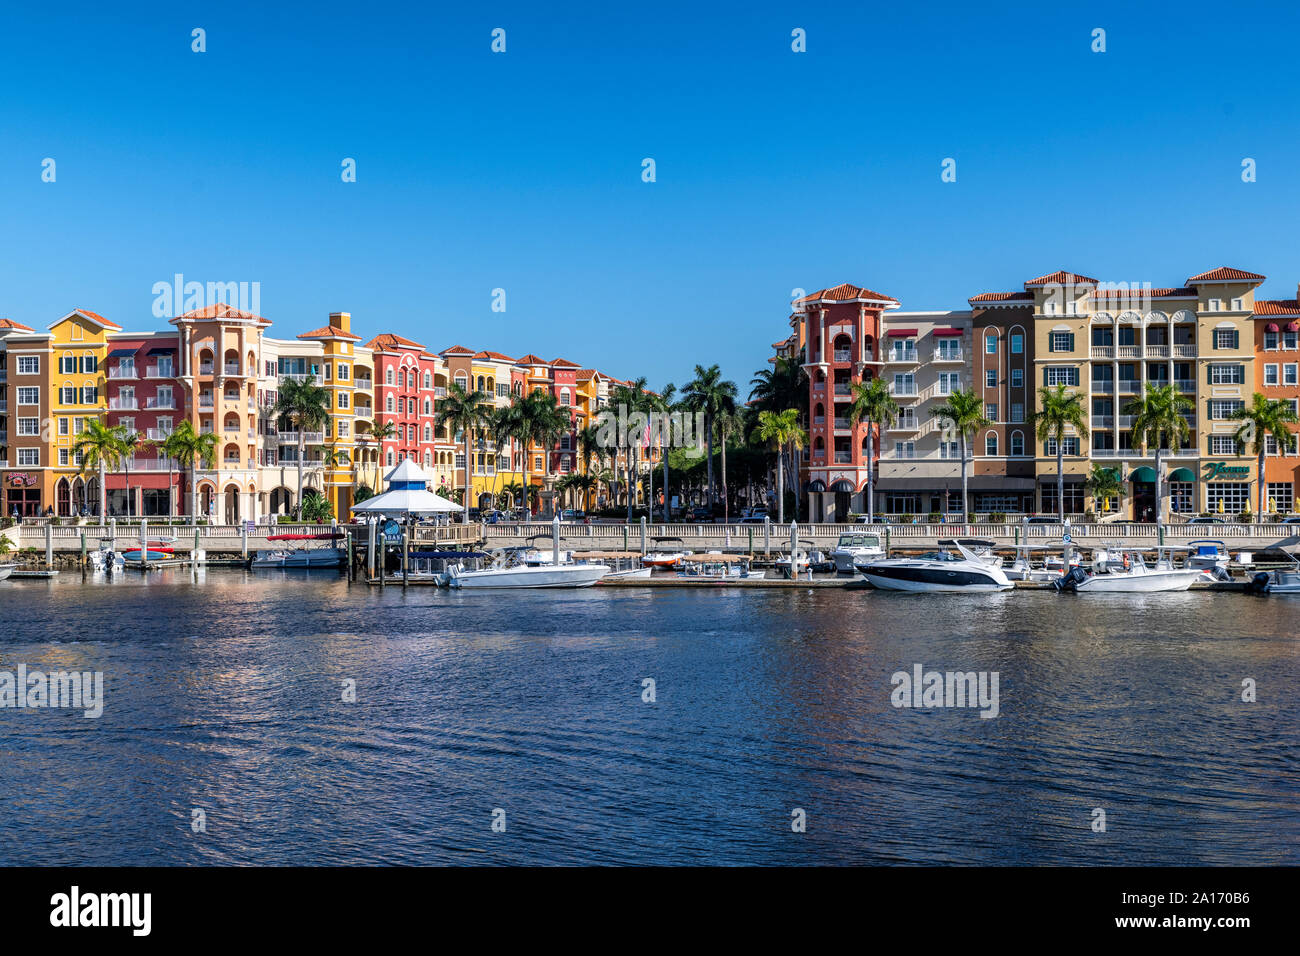 Bayfront, shops and condominiums on the waterfront, Naples, Florida, USA. Stock Photo